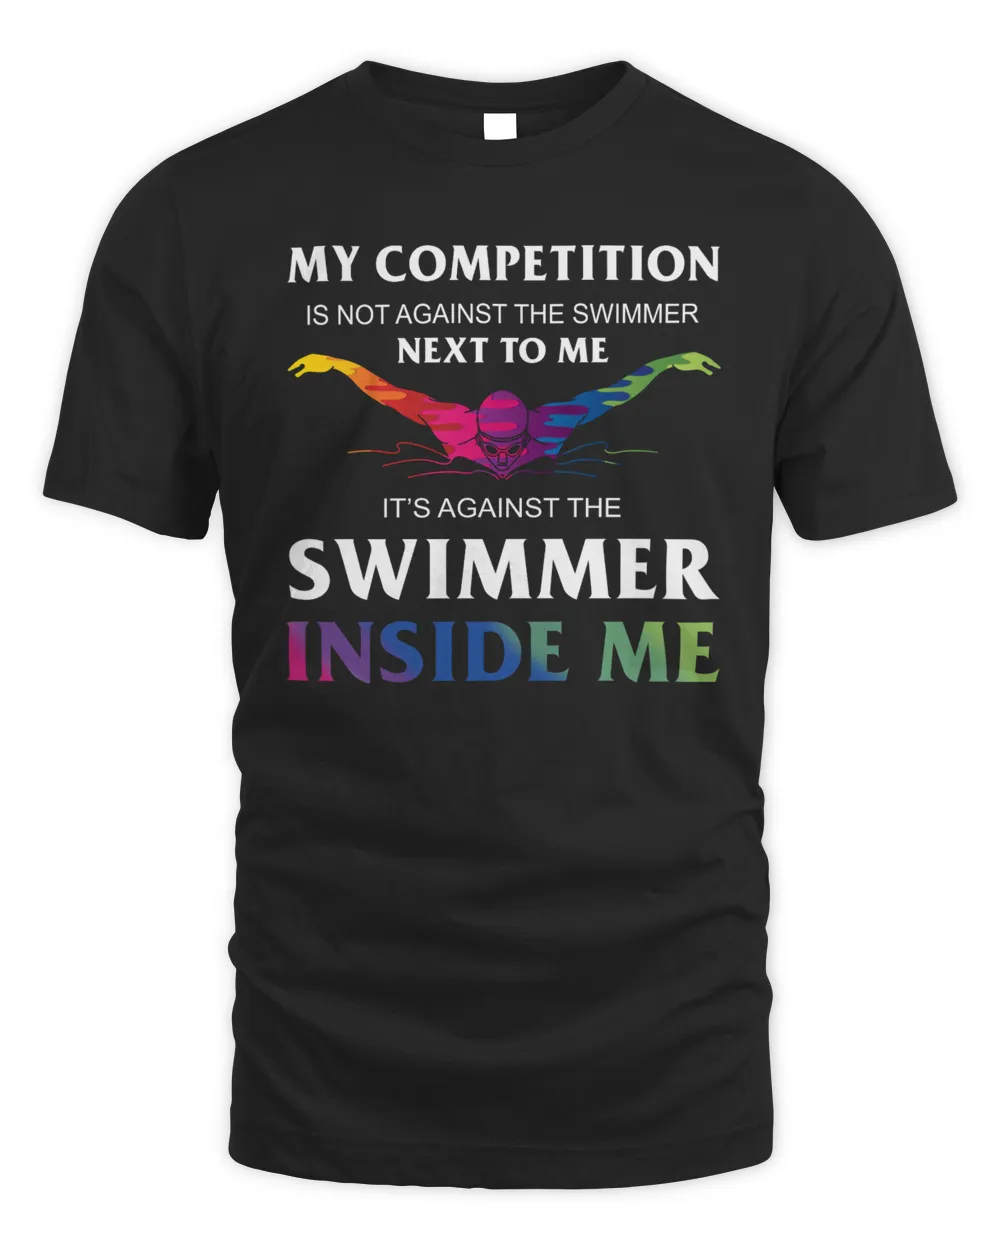 My competition is not against the swimmer next to me